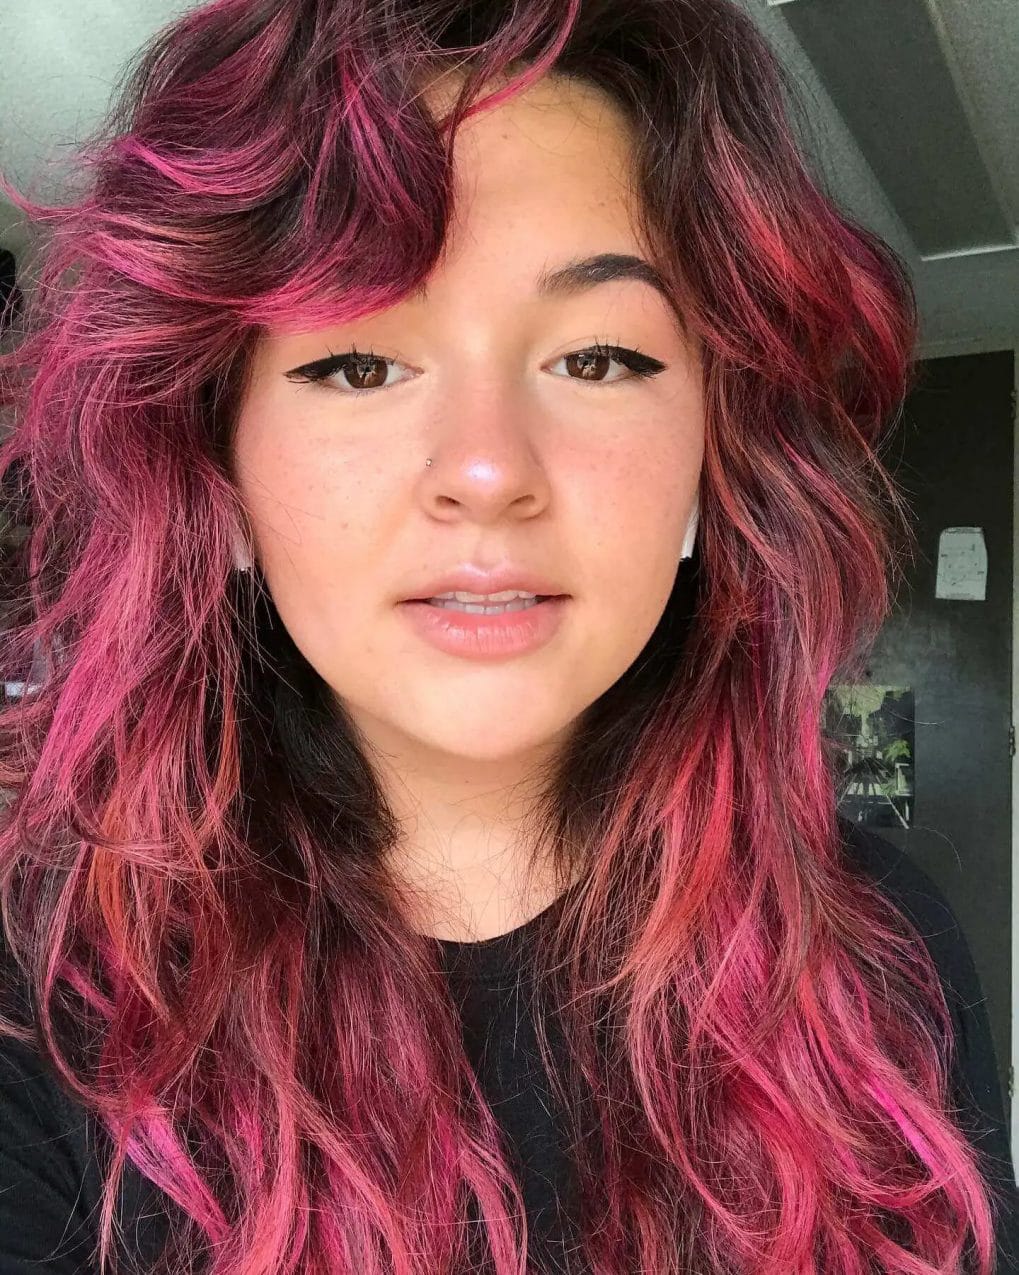 Bright fuchsia waves with long, side-swept bangs